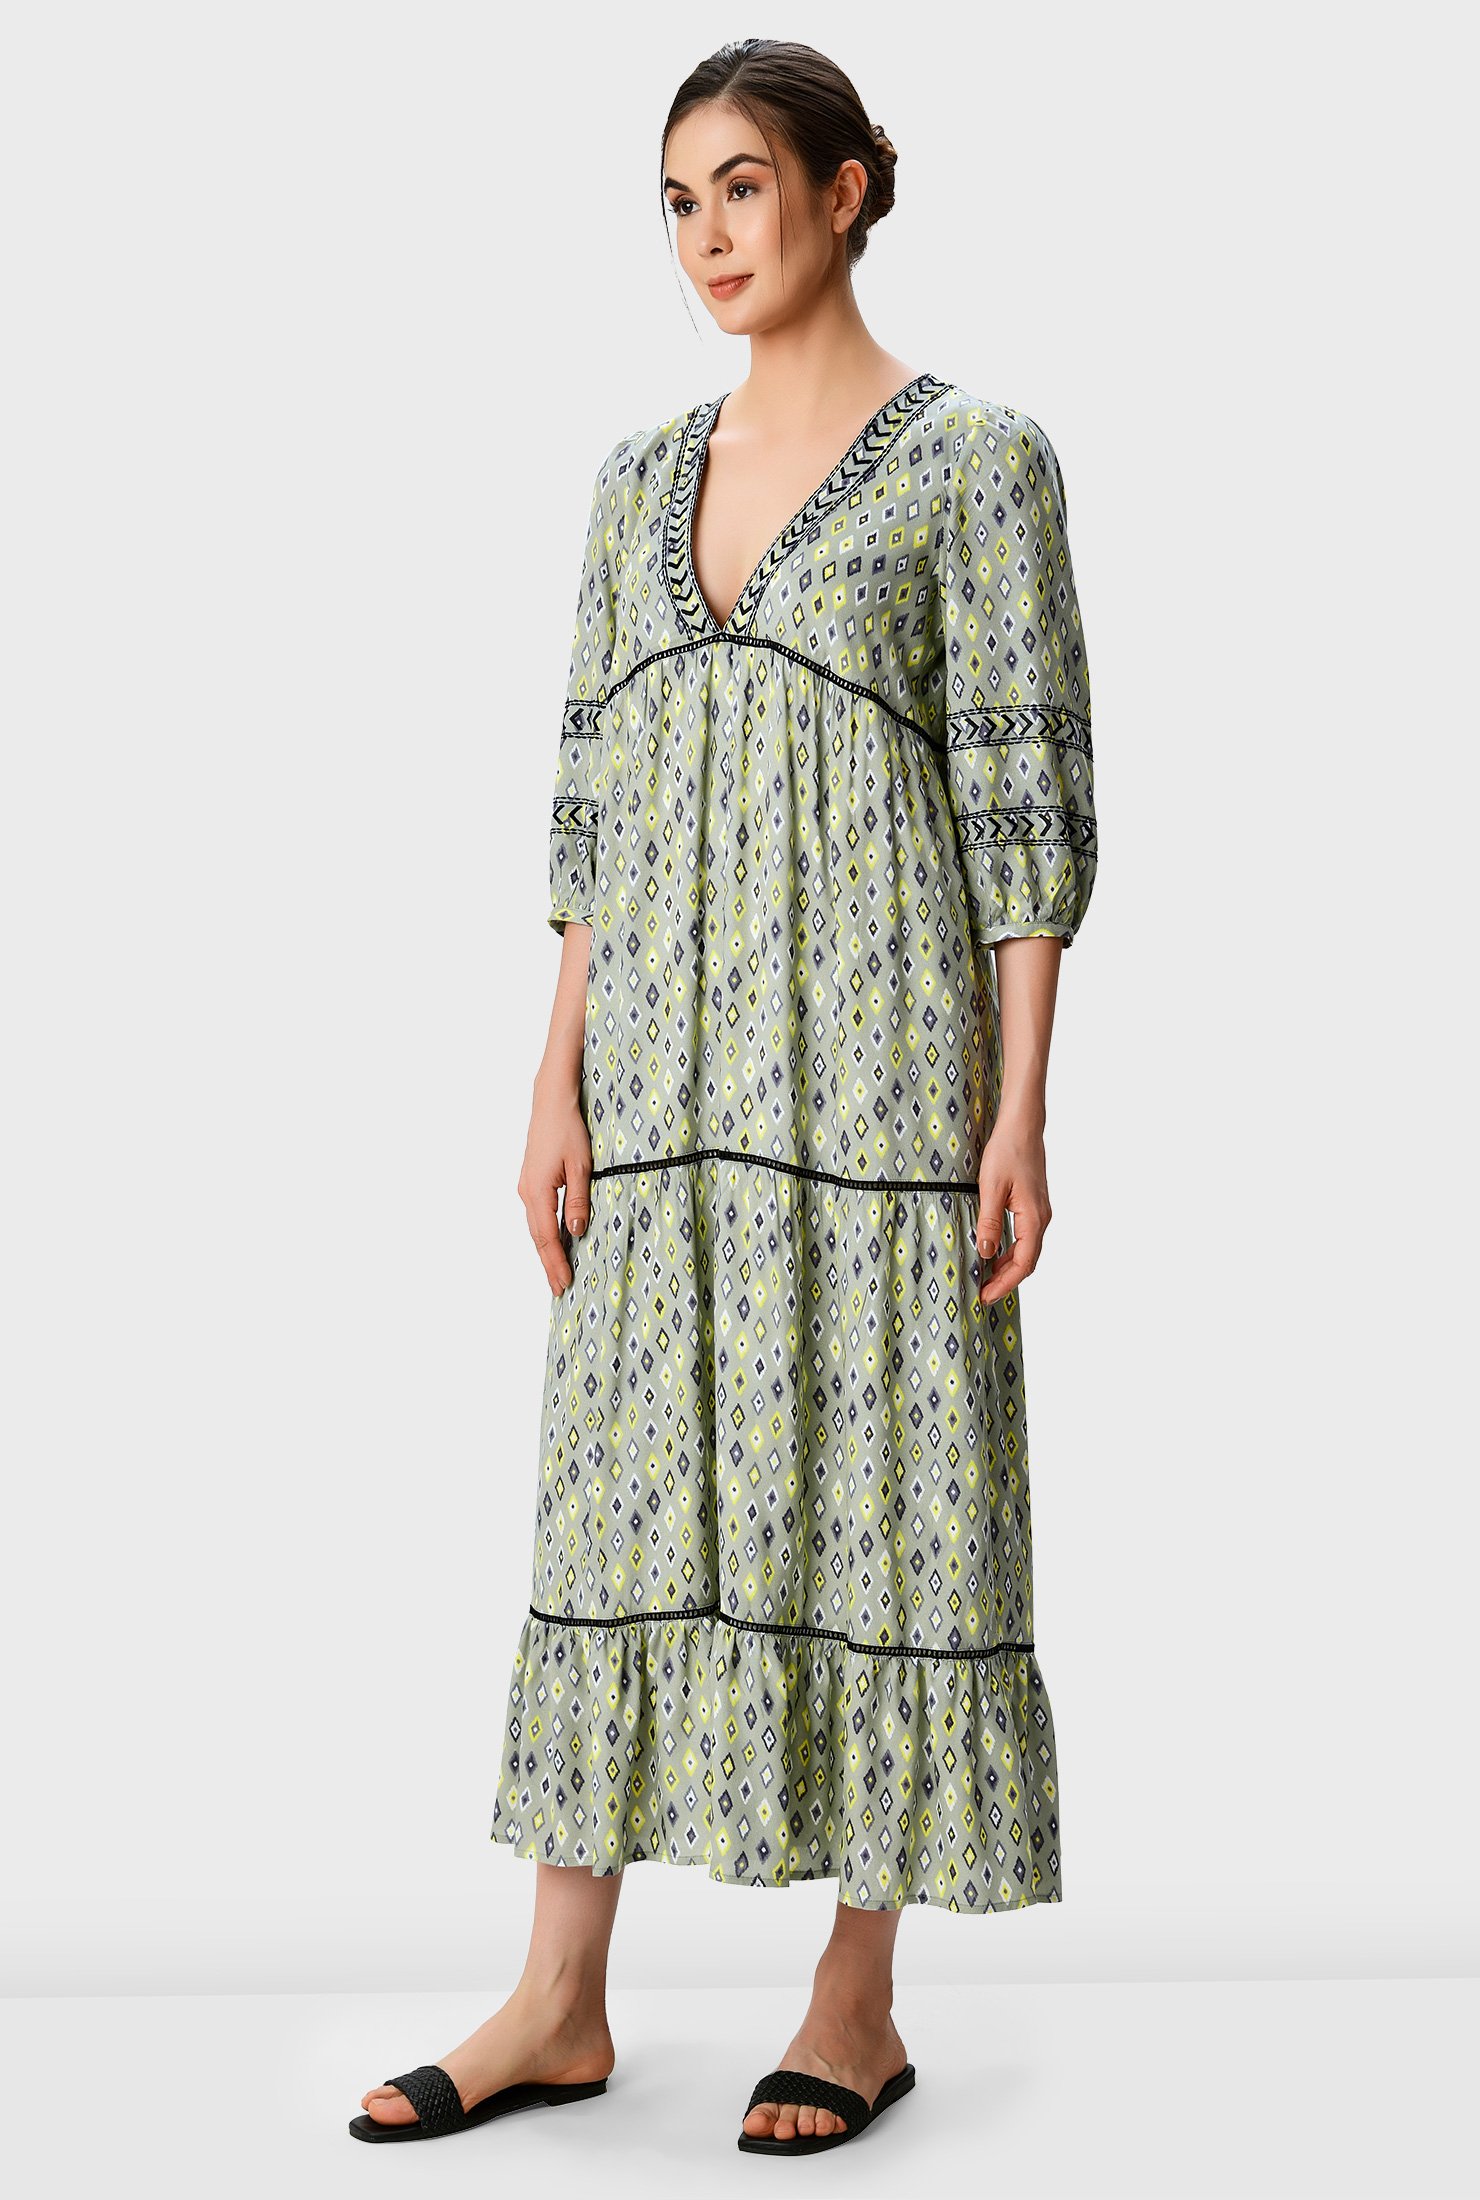 Look chic in the sunshine with our easy-breezy day dress in ikat print with graphic embroidery at the neckline and sleeves and volumized with ruched pleat tiers.